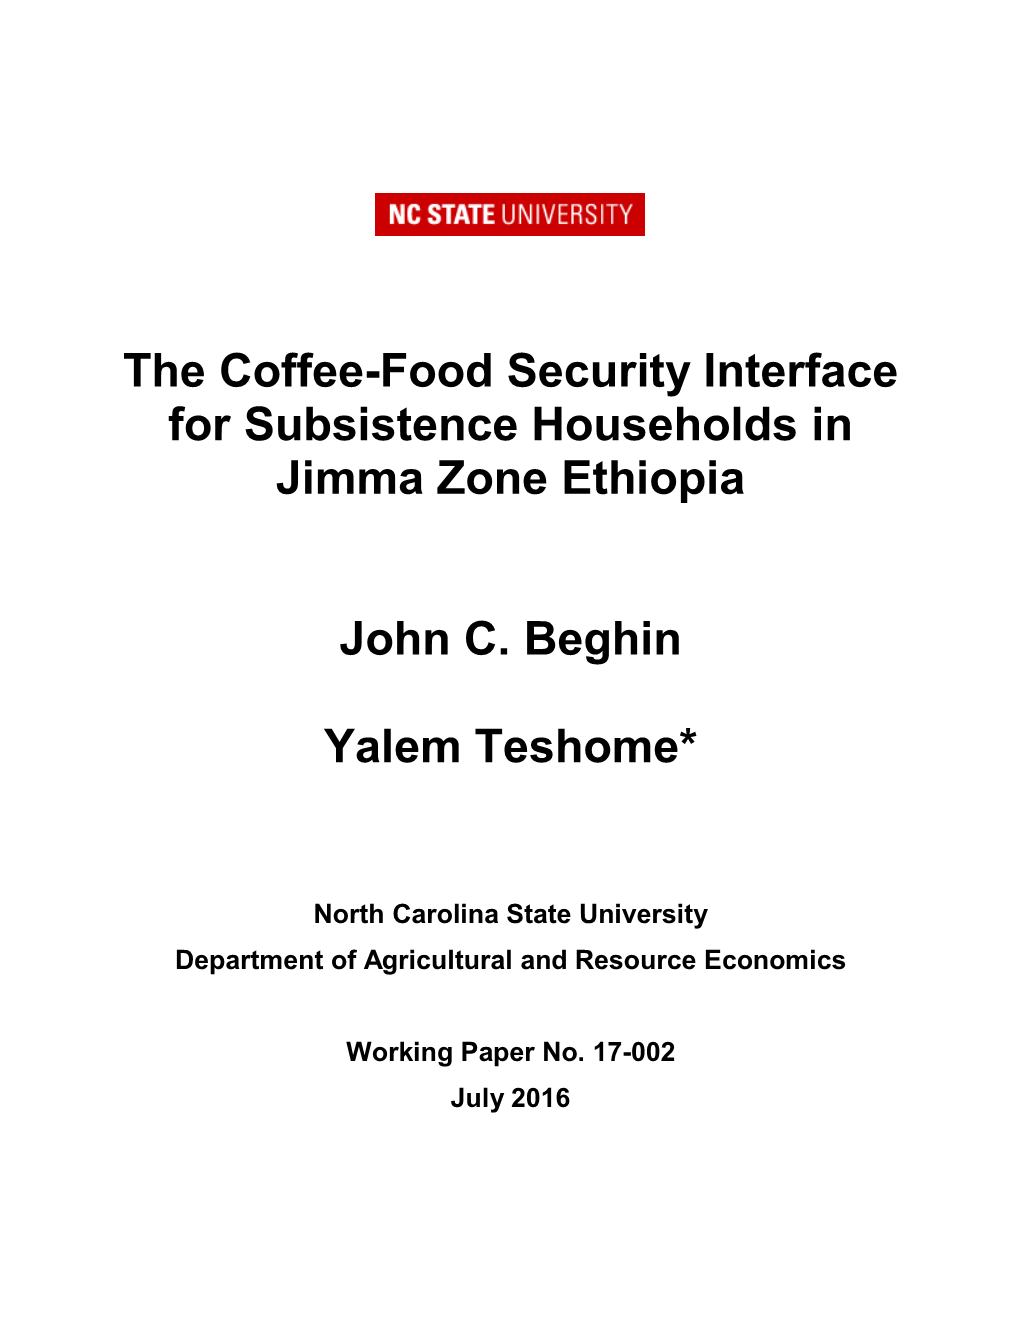 The Coffee-Food Security Interface for Subsistence Households in Jimma Zone Ethiopia